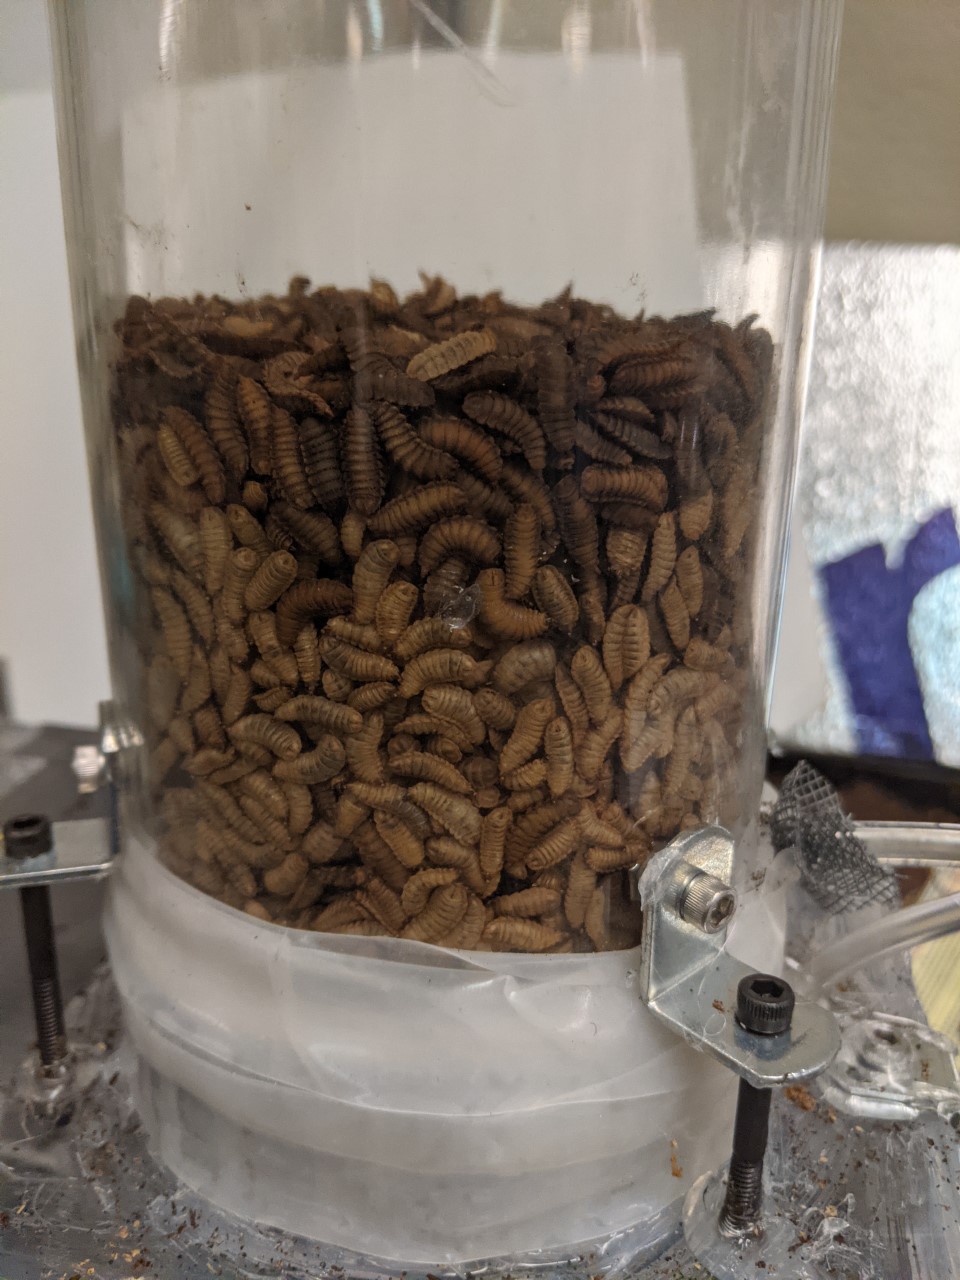 Living larvae inside the apparatus between fluidization experiments at Georgia Tech’s School of Physics’ Howey Physics building. (Photo credit: Grace Cassidy, Georgia Tech)